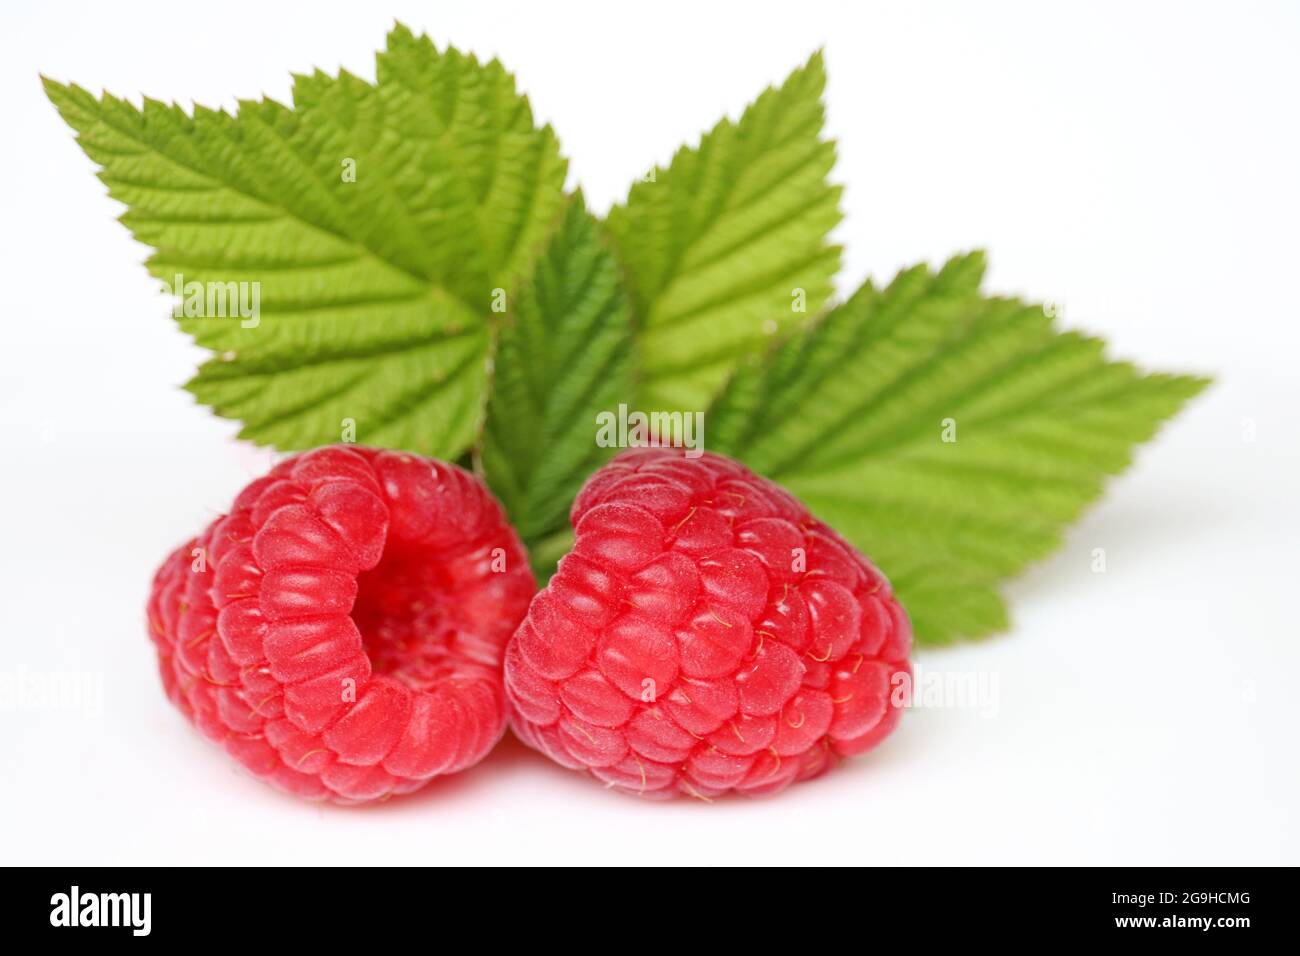 Ripe raspberries with green leaves on white background. Red juicy berries close up, summer crop Stock Photo